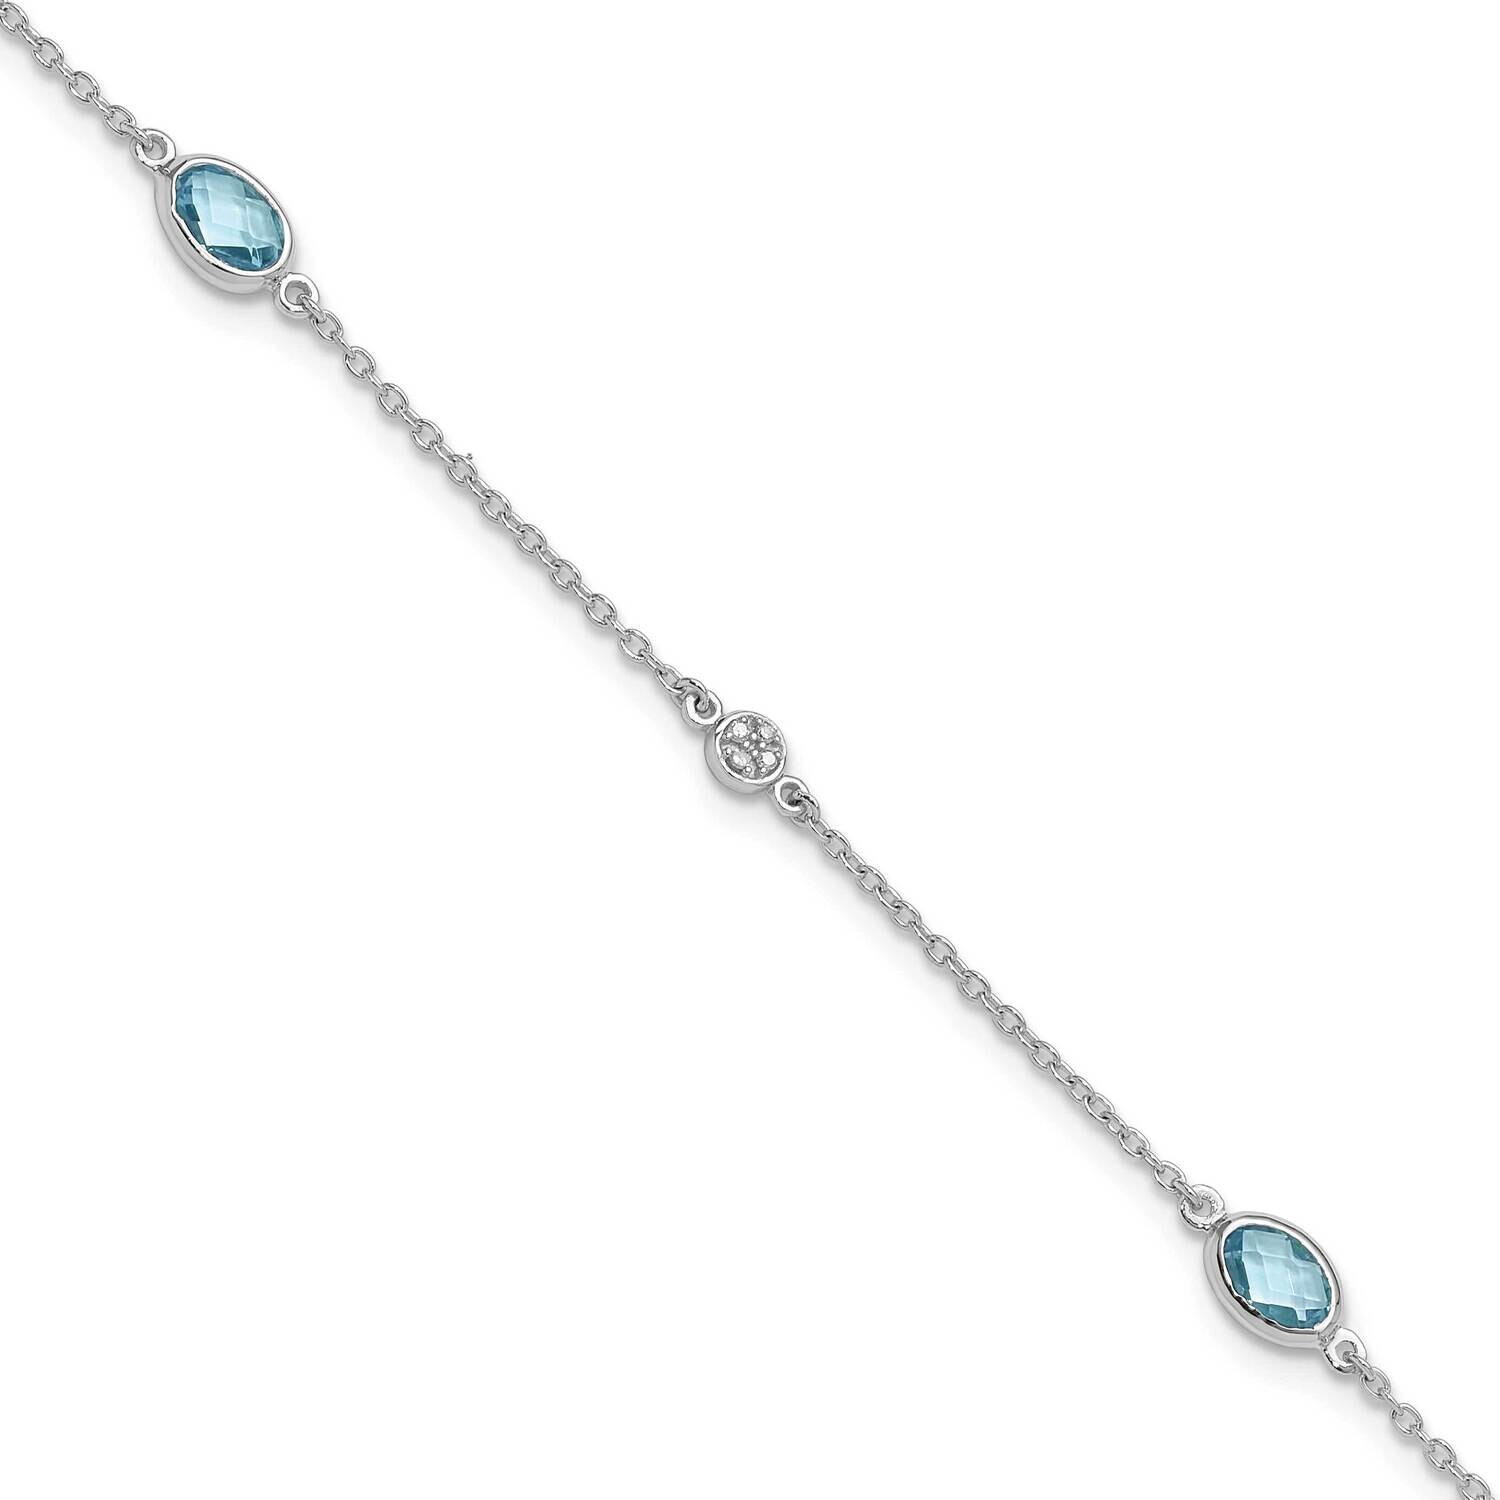 Rh Plated White Ice Diamond Blue Topaz 1.25 In Extension Bracelet 7.5 Inch Sterling Silver QW368BT-7.5